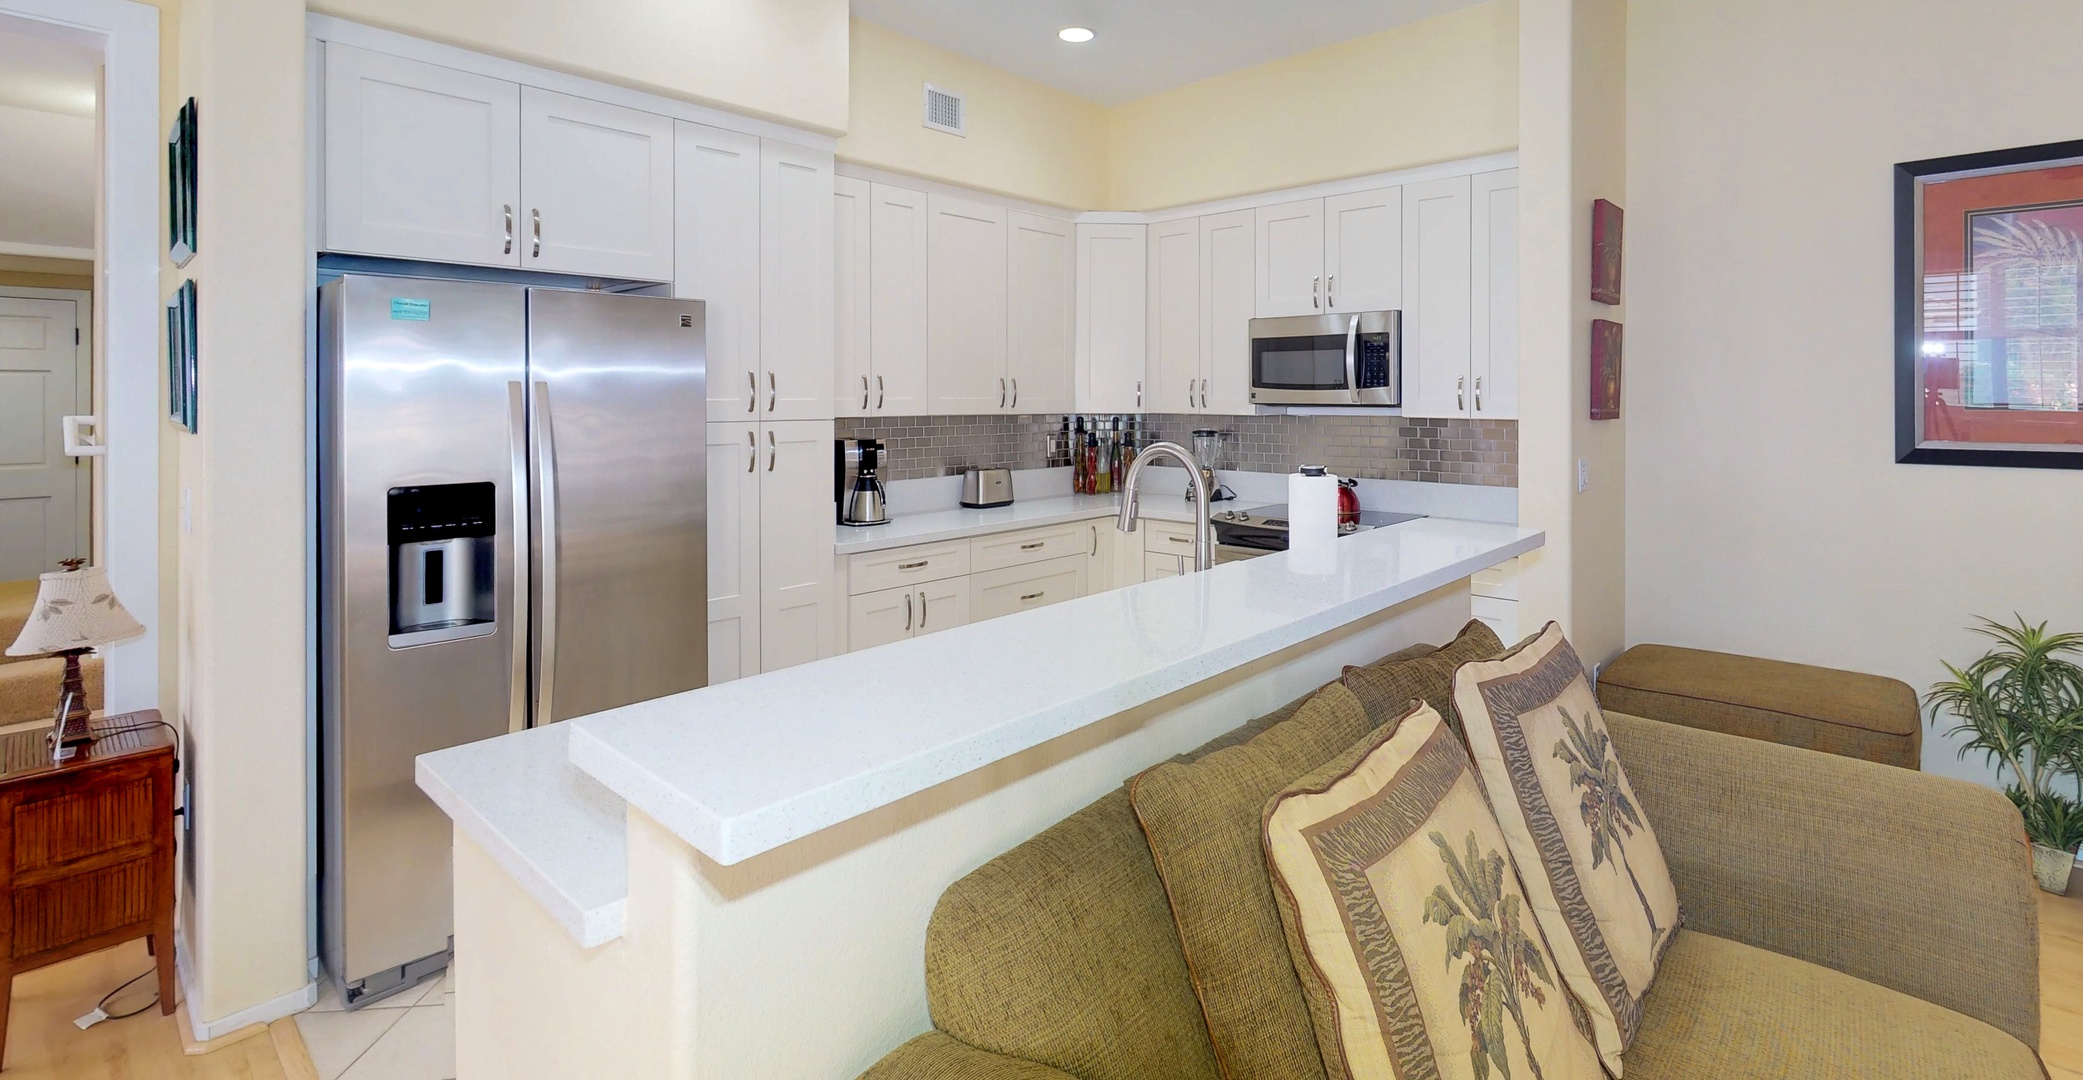 Kapolei Vacation Rentals, Coconut Plantation 1078-3 - The bright kitchen features many amenities including a fridge, oven, extended counter-tops and bright lighting.